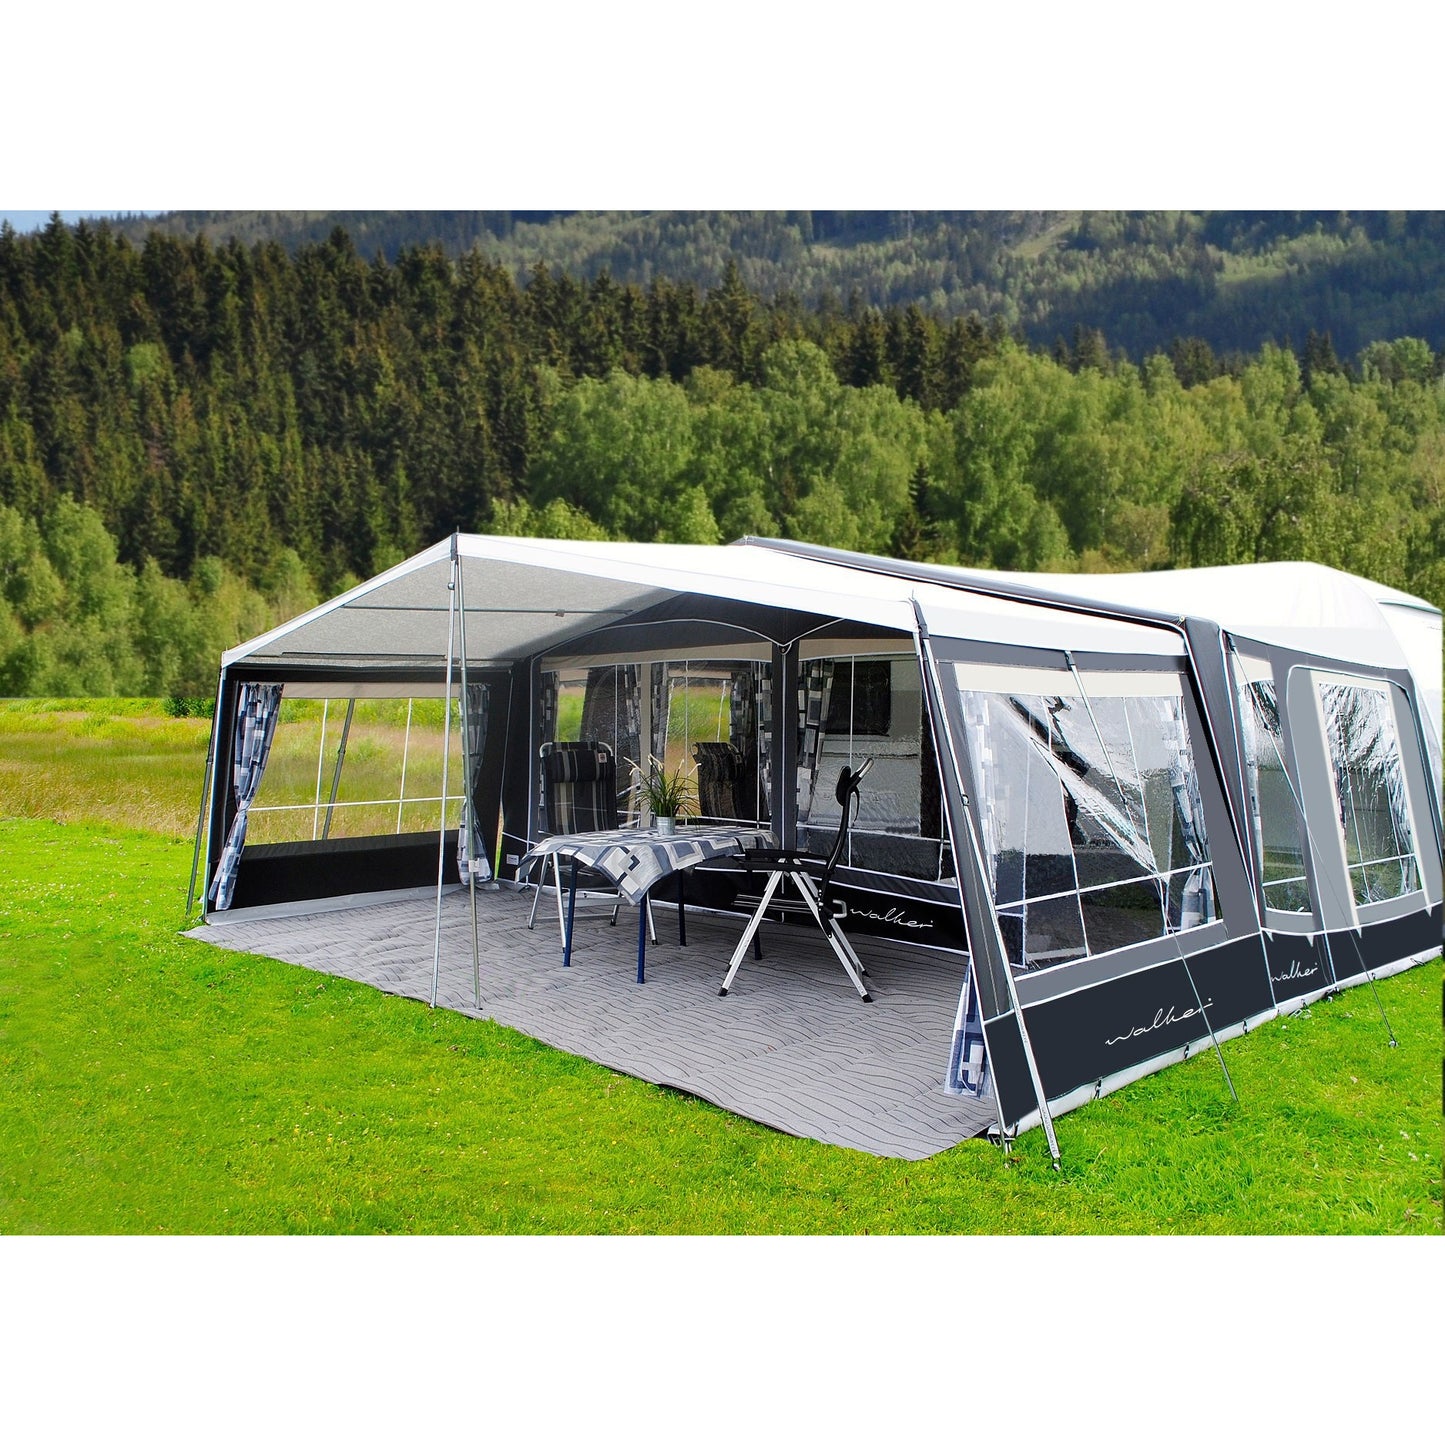 Walker Patio Canopy for Caravan Awning (2018) + Free Storm Straps - Quality Caravan Awnings